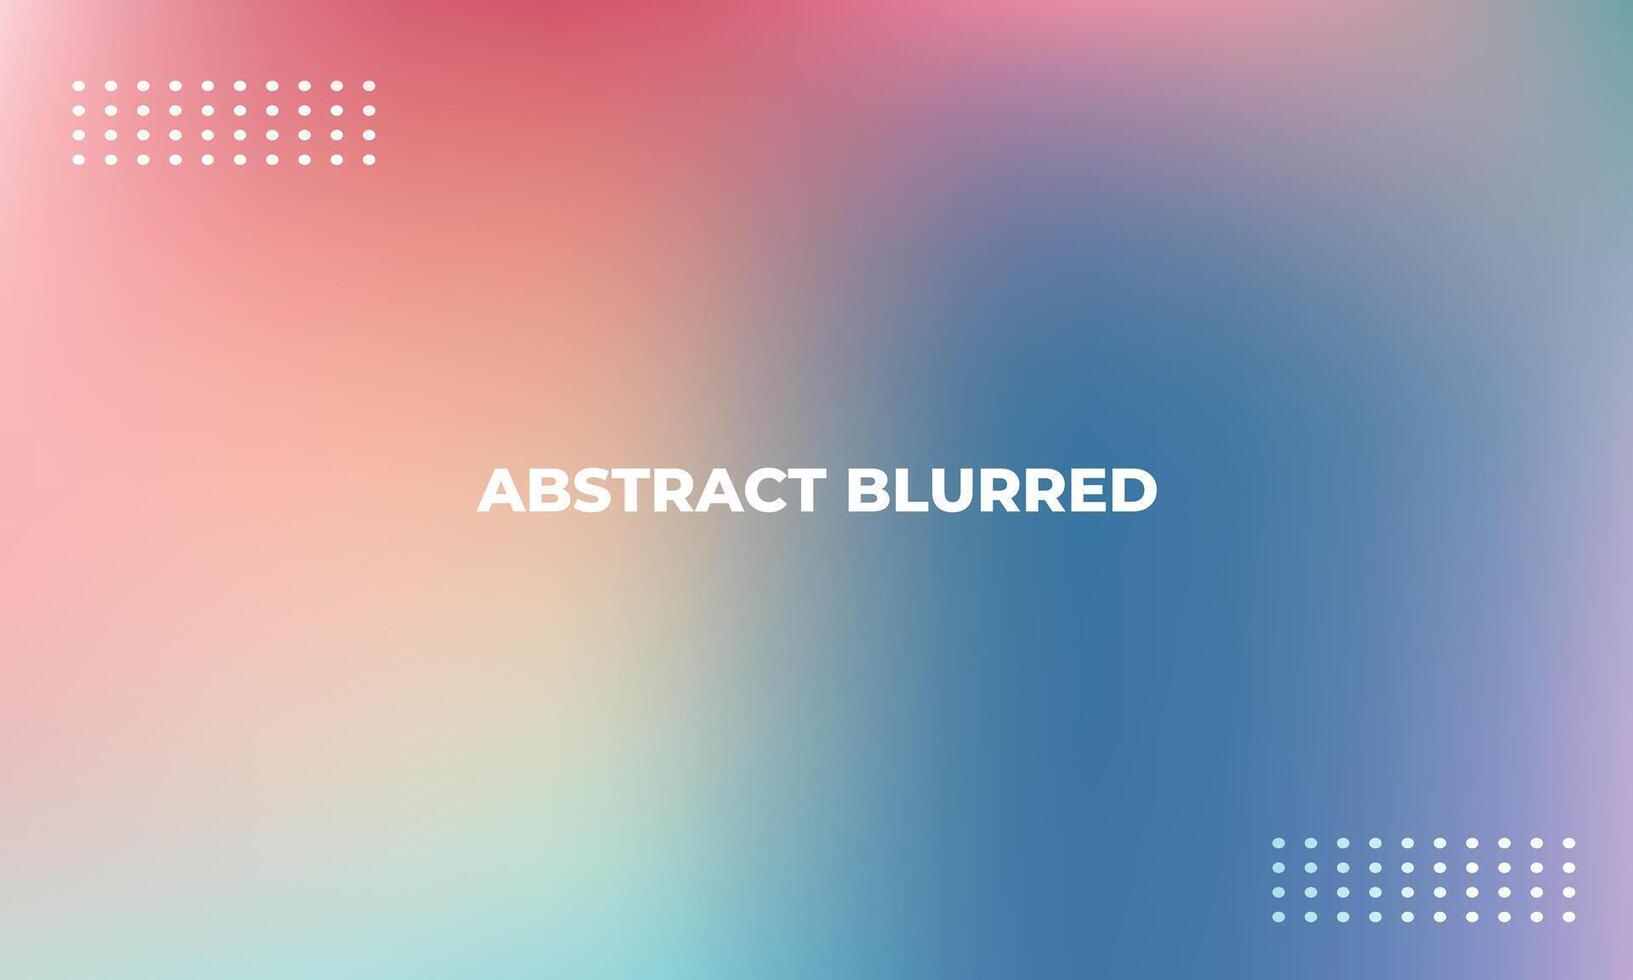 ABSTRACT BLURRED BACKGROUND vector